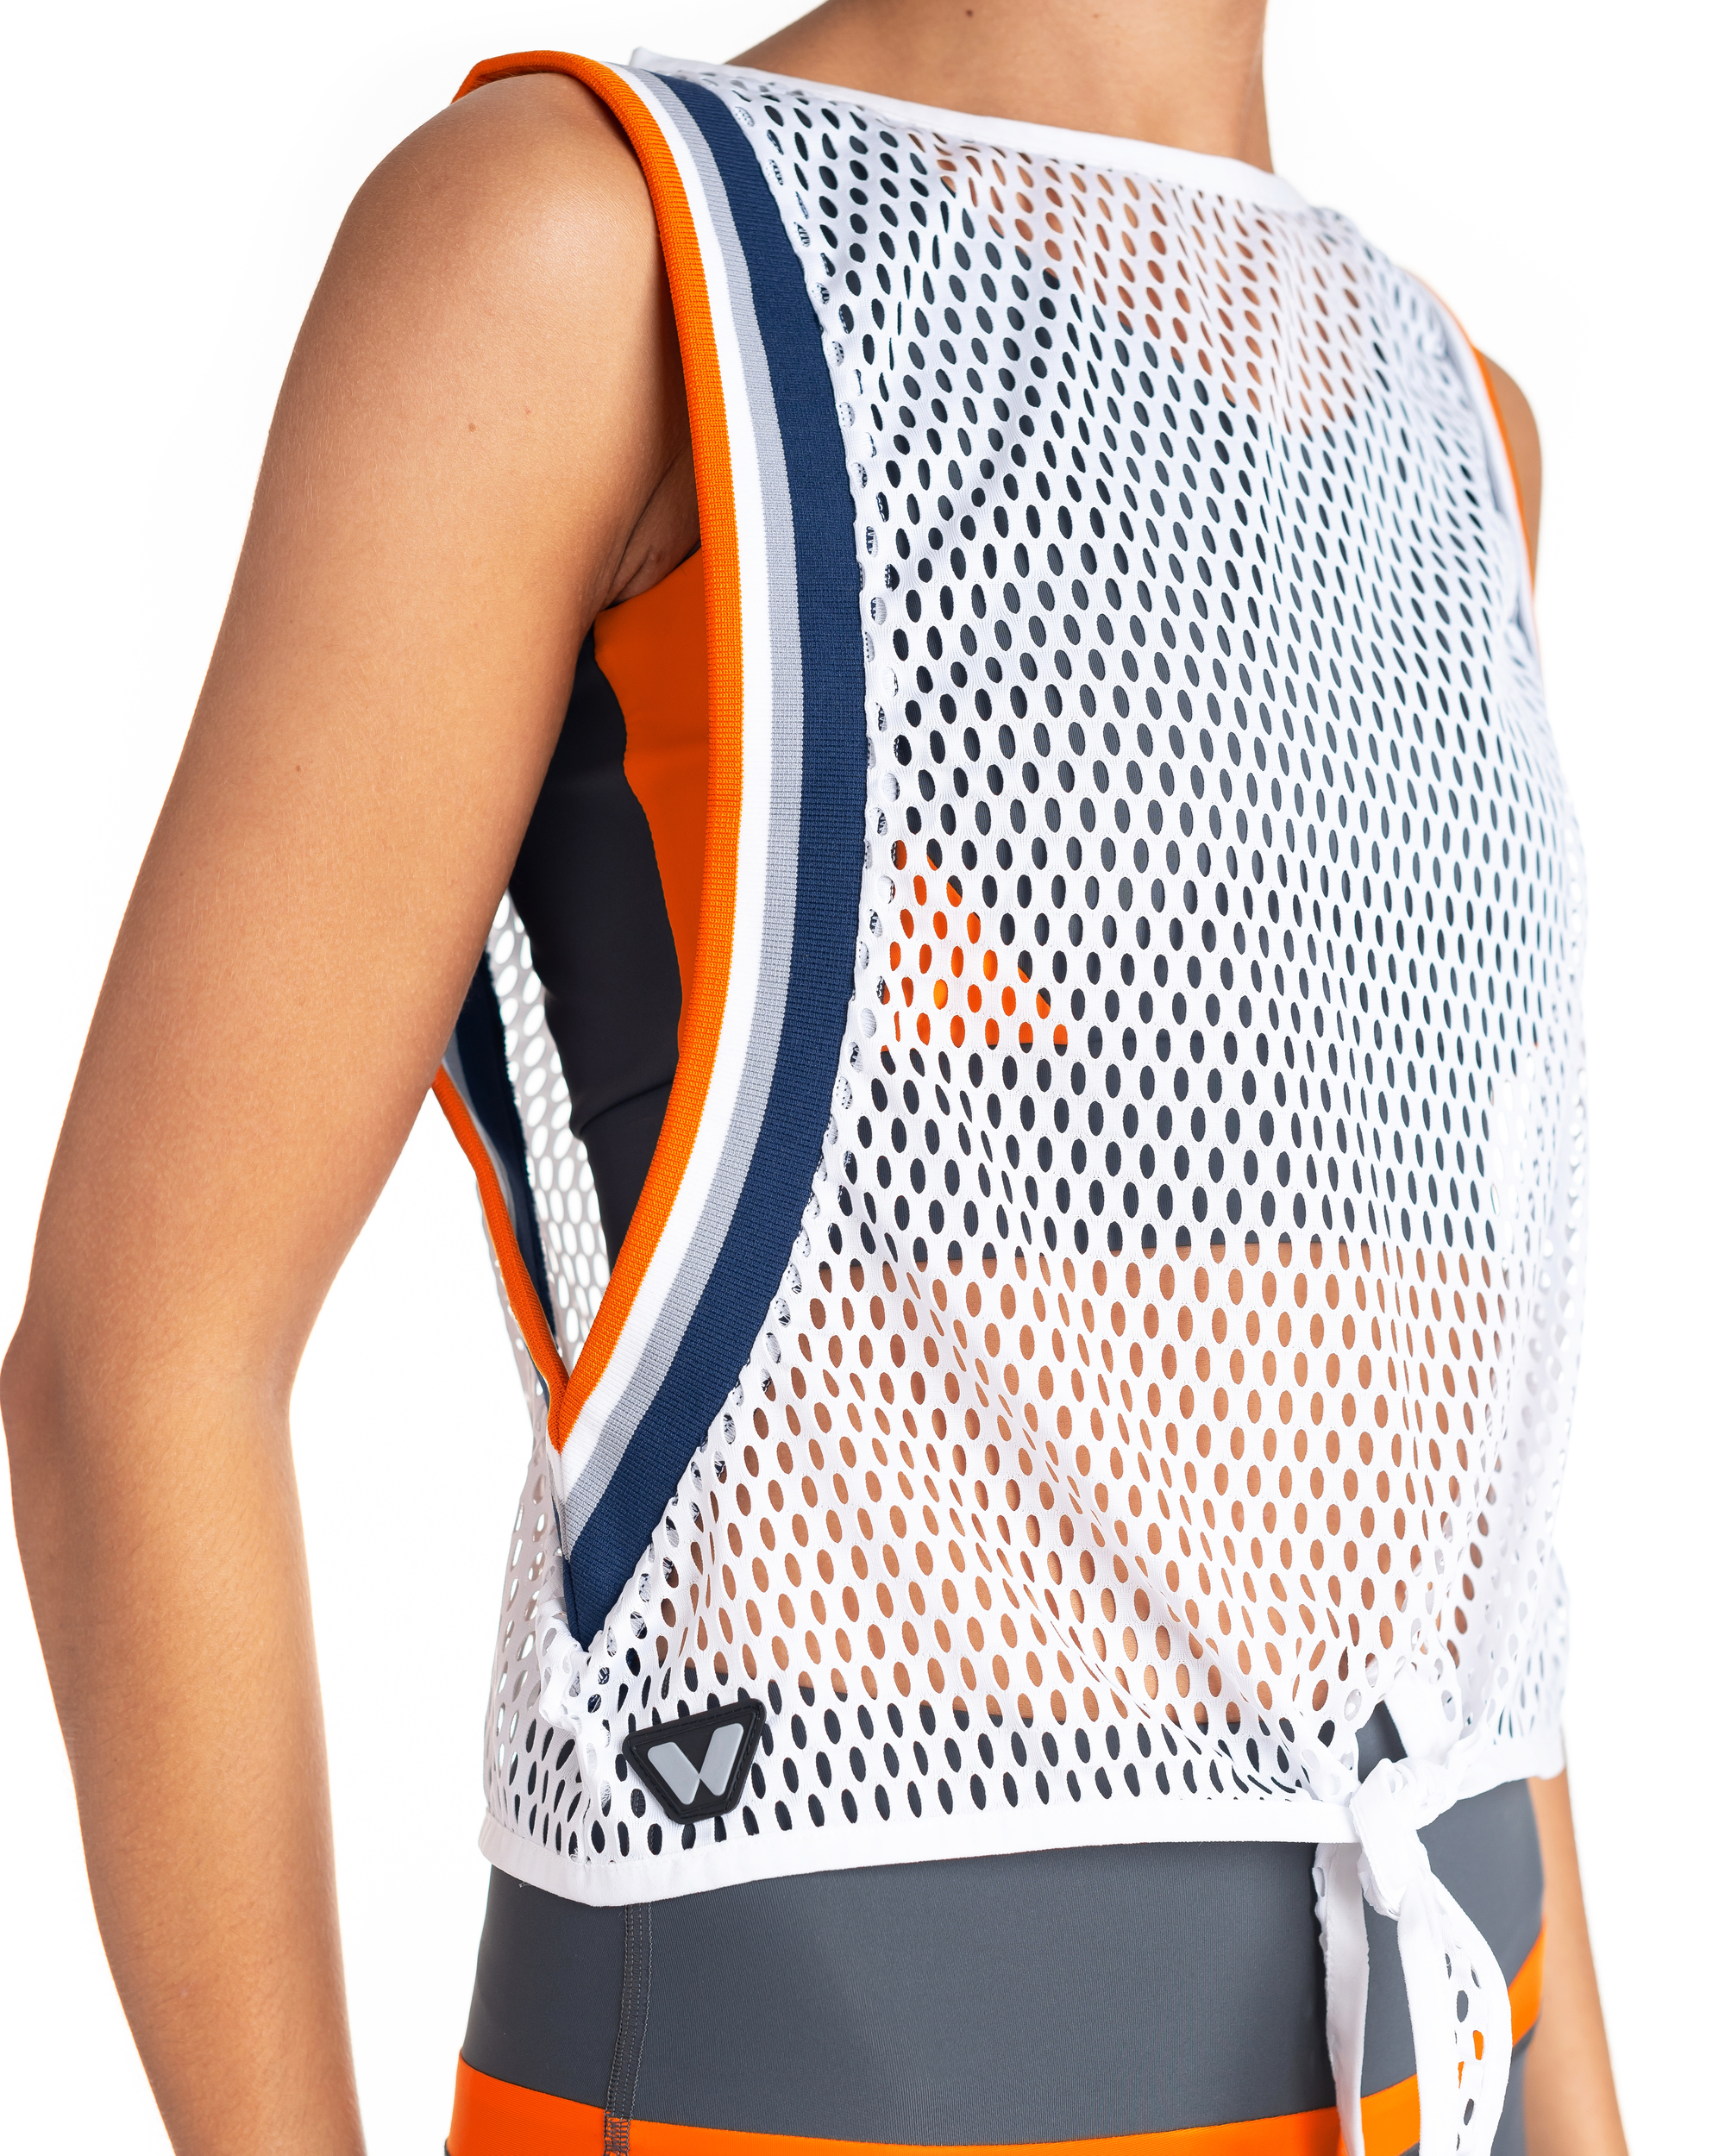 Verlichting spoor leven SPORT MESH TOP WHITE Sport tank top, perfect to complete your